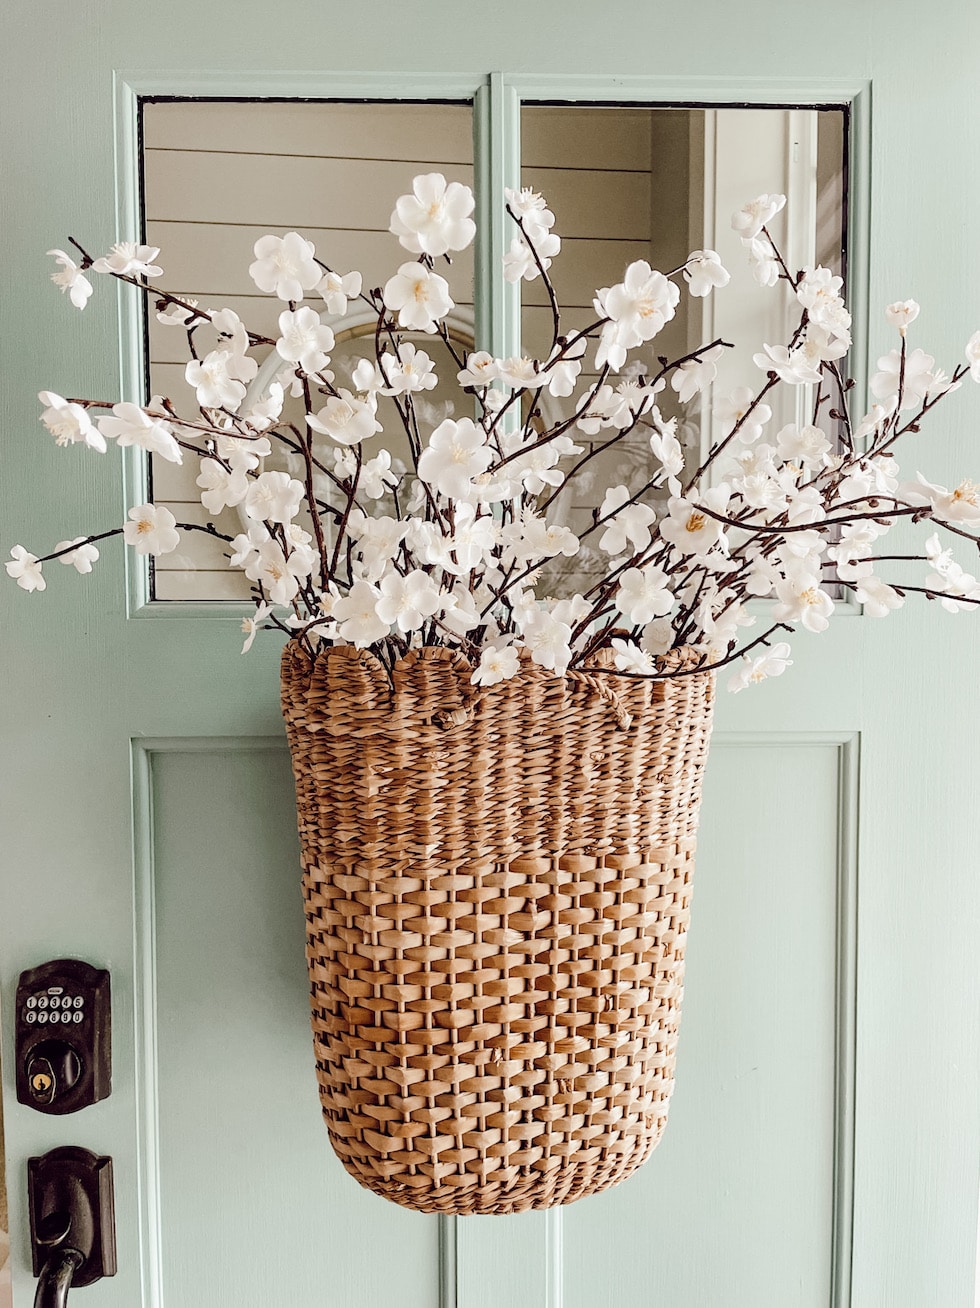 How to Decorate Your Home for Spring (24 Simple Ideas)